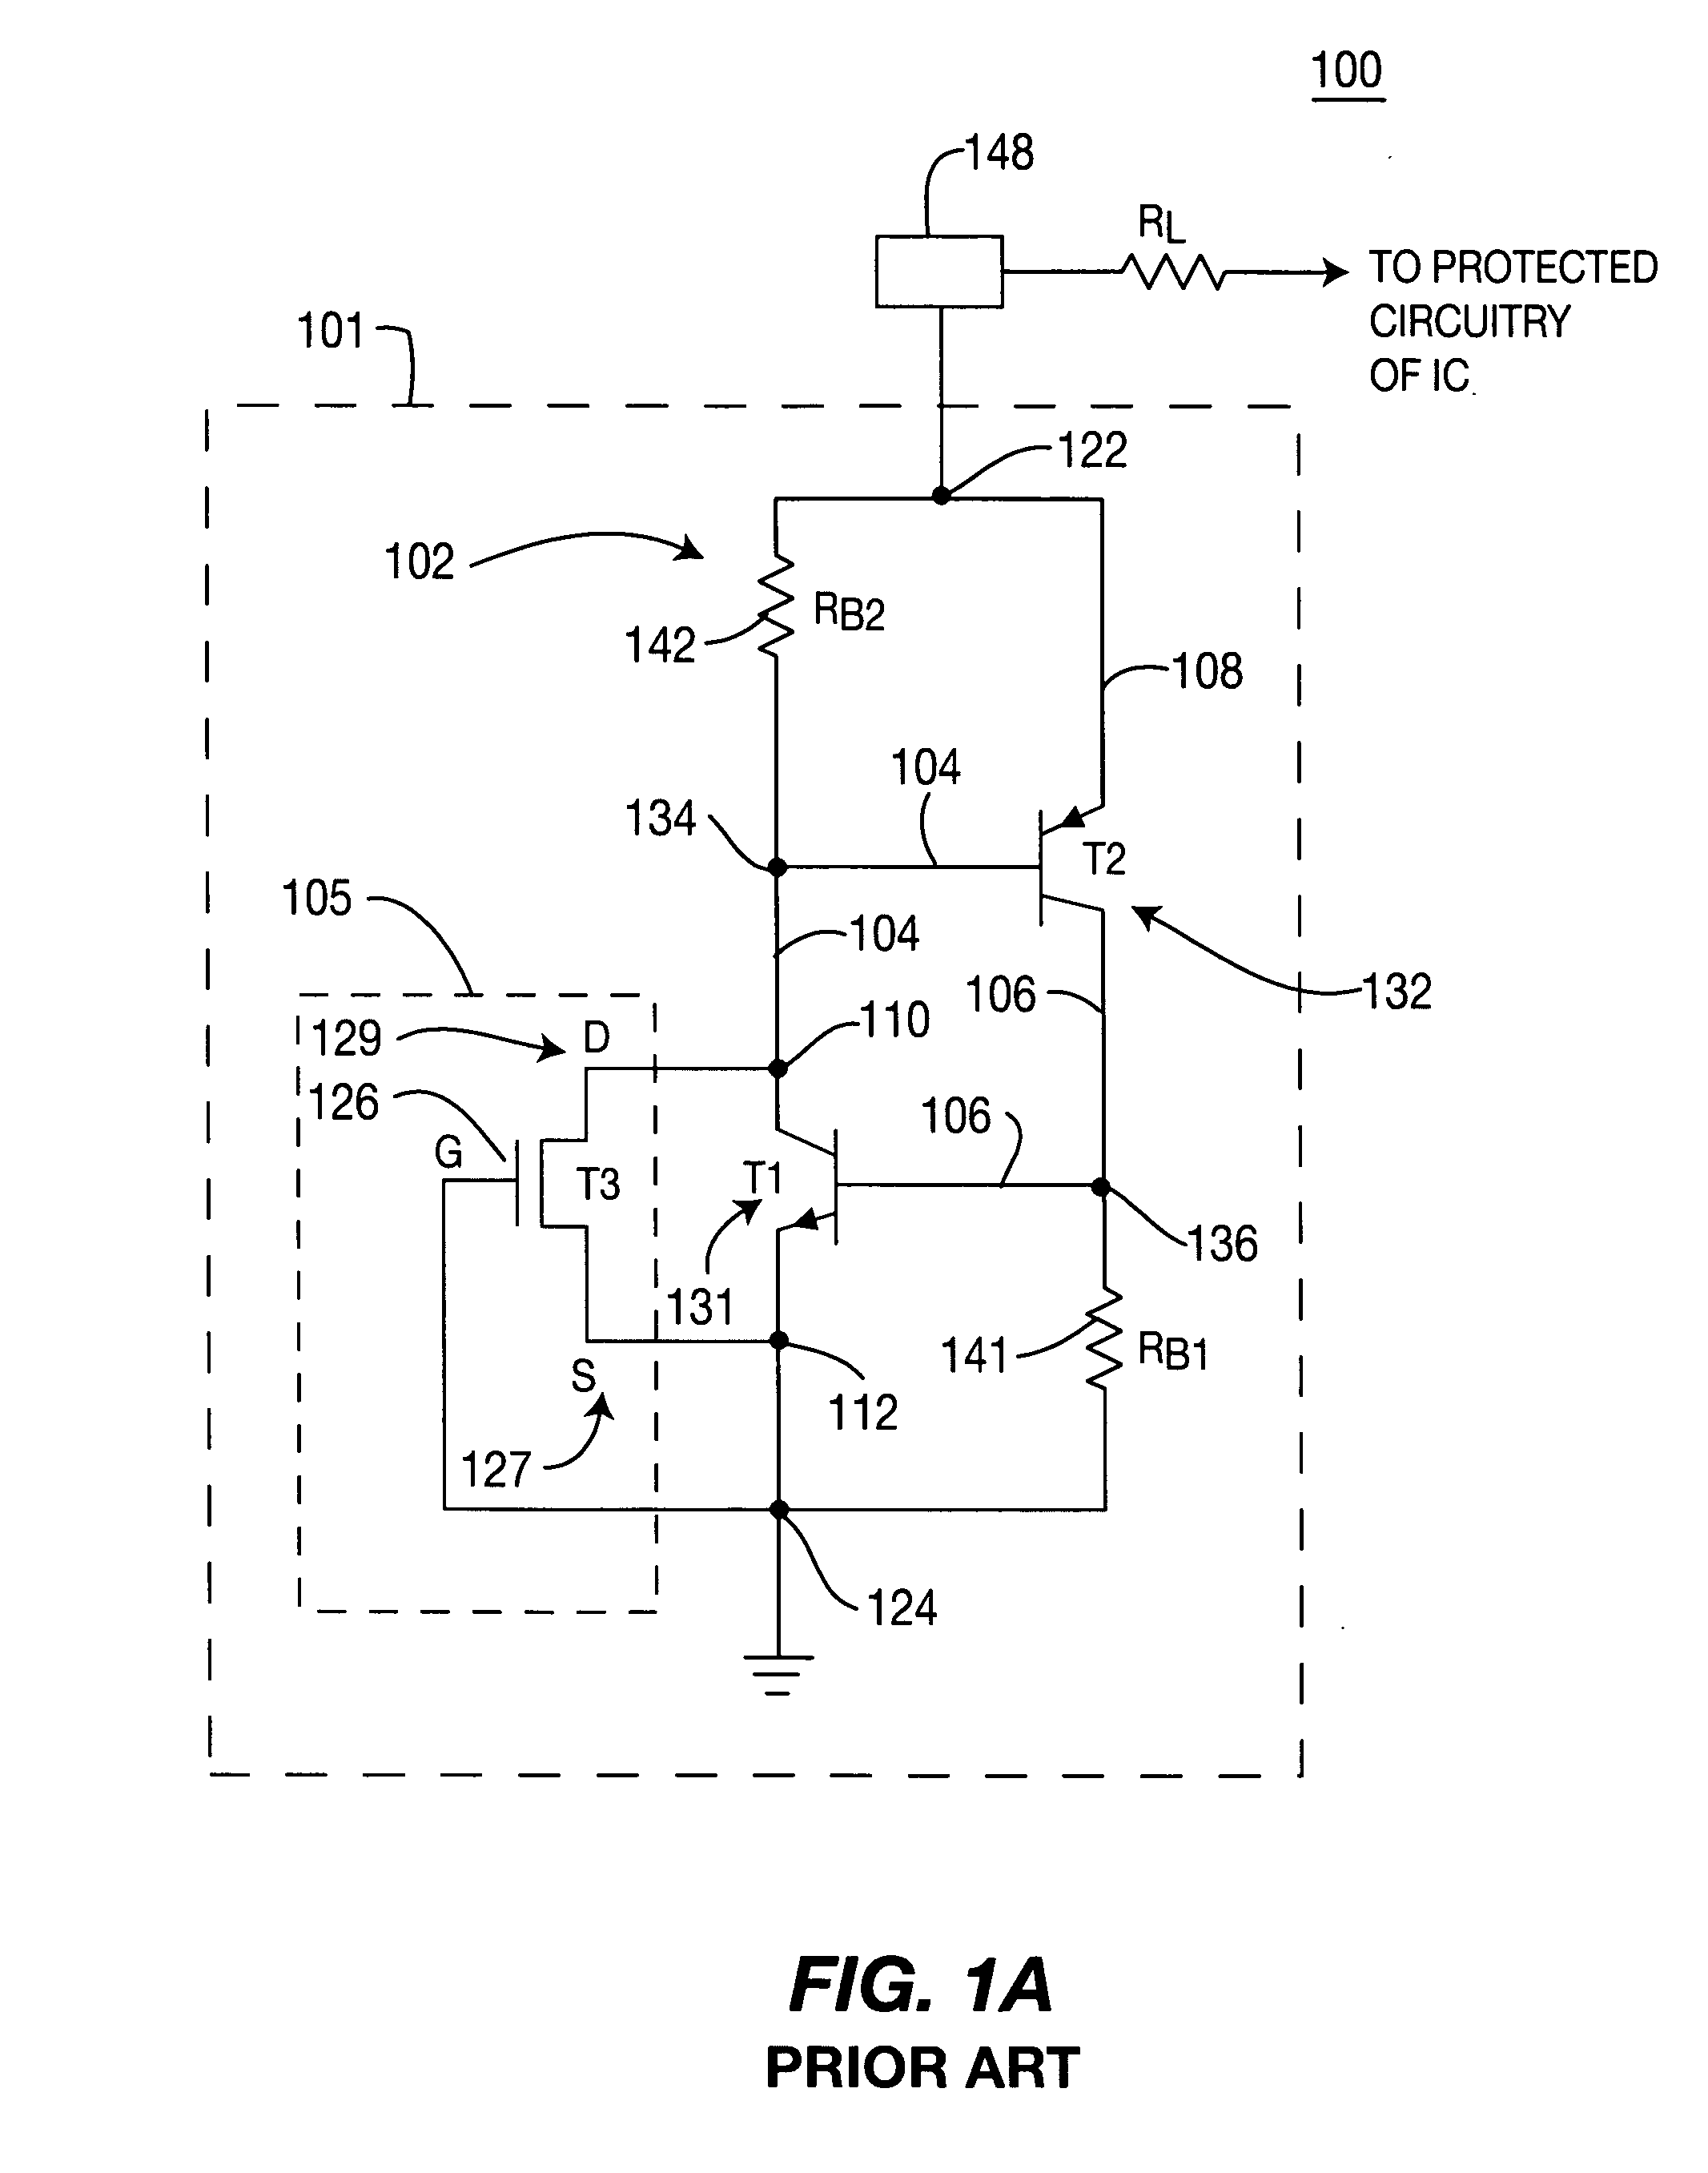 Silicon controlled rectifier electrostatic discharge protection device for power supply lines with powerdown mode of operation